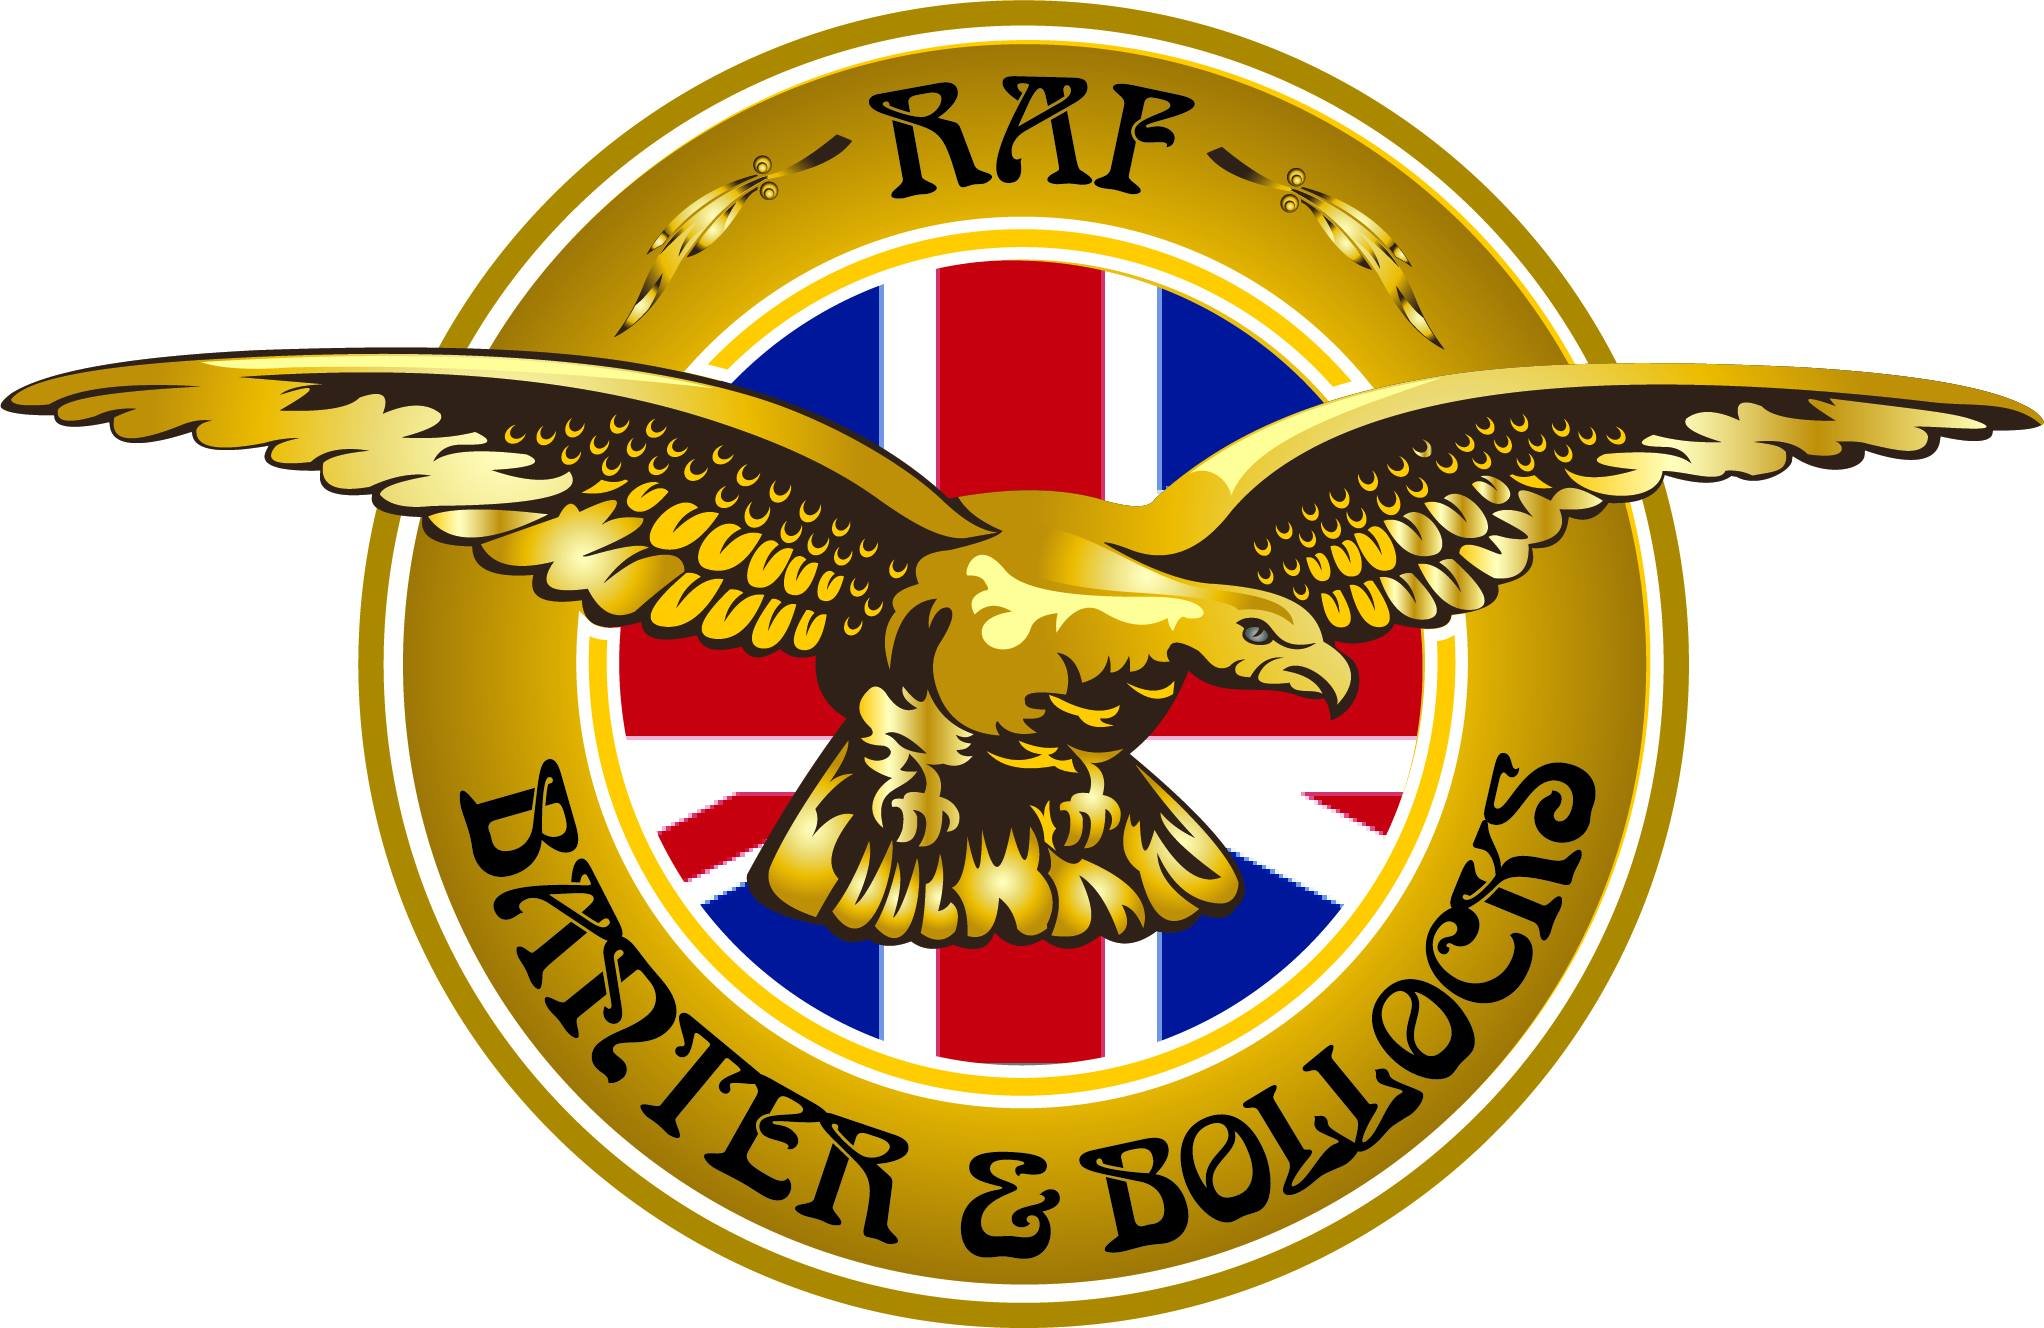 Founded on April Fools Day 1918 - the world's best flying club ever since.

Also on Facebook.